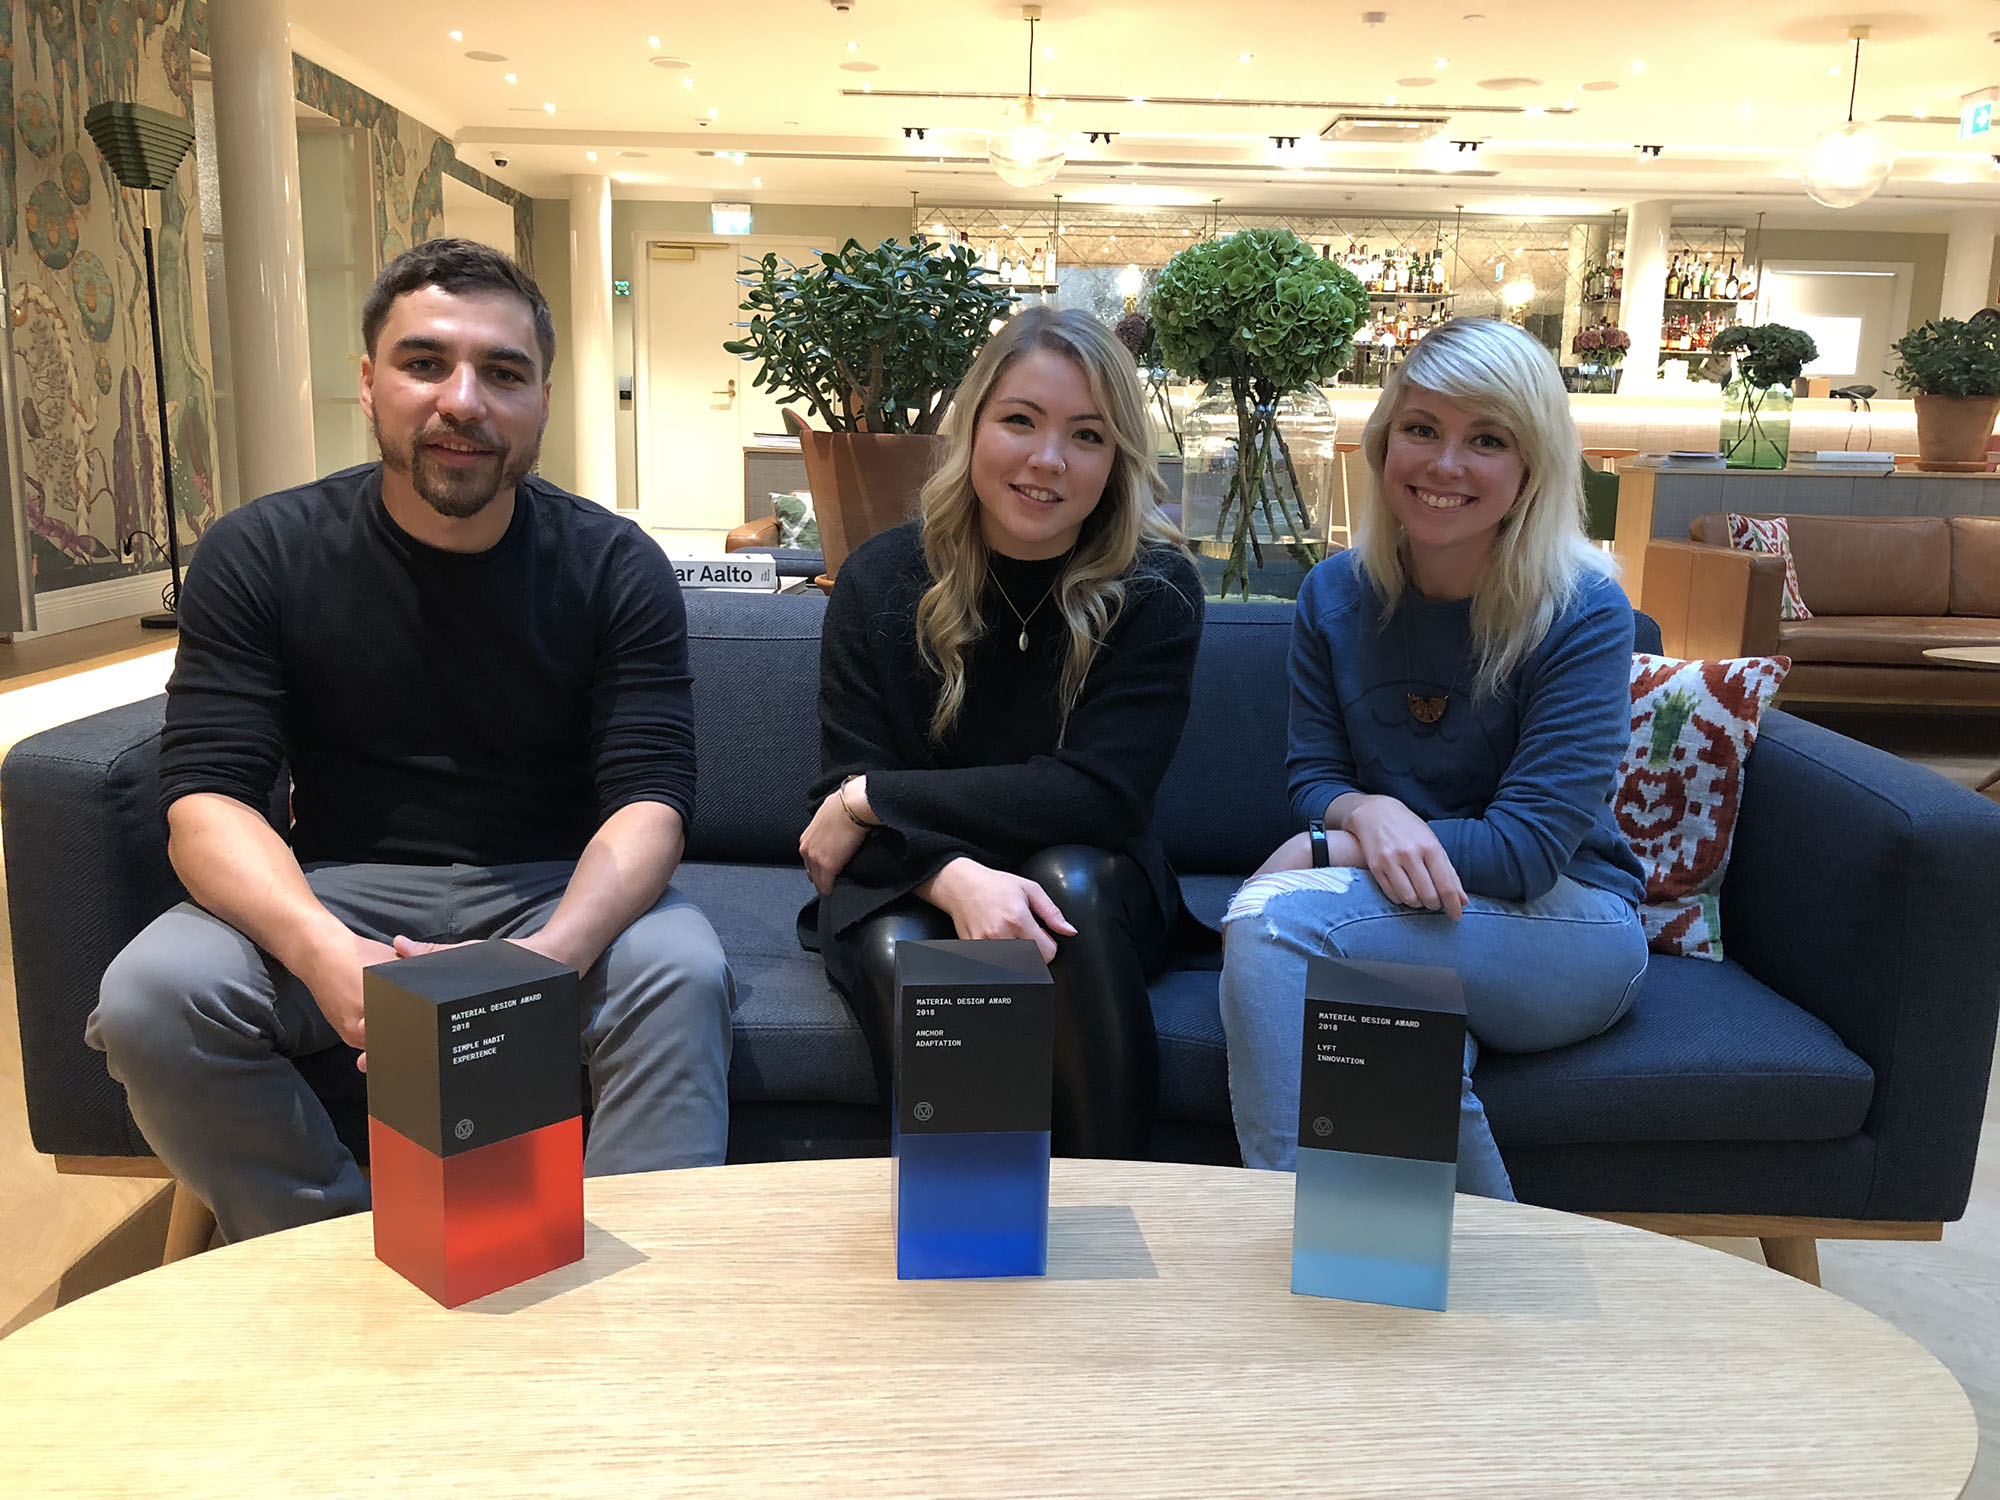 From left, new media design alumni with Google Material Design Awards in Helsinki, Finland: Valentin Drown '11, Emmi Hintz '12 and Linzi Berry '09